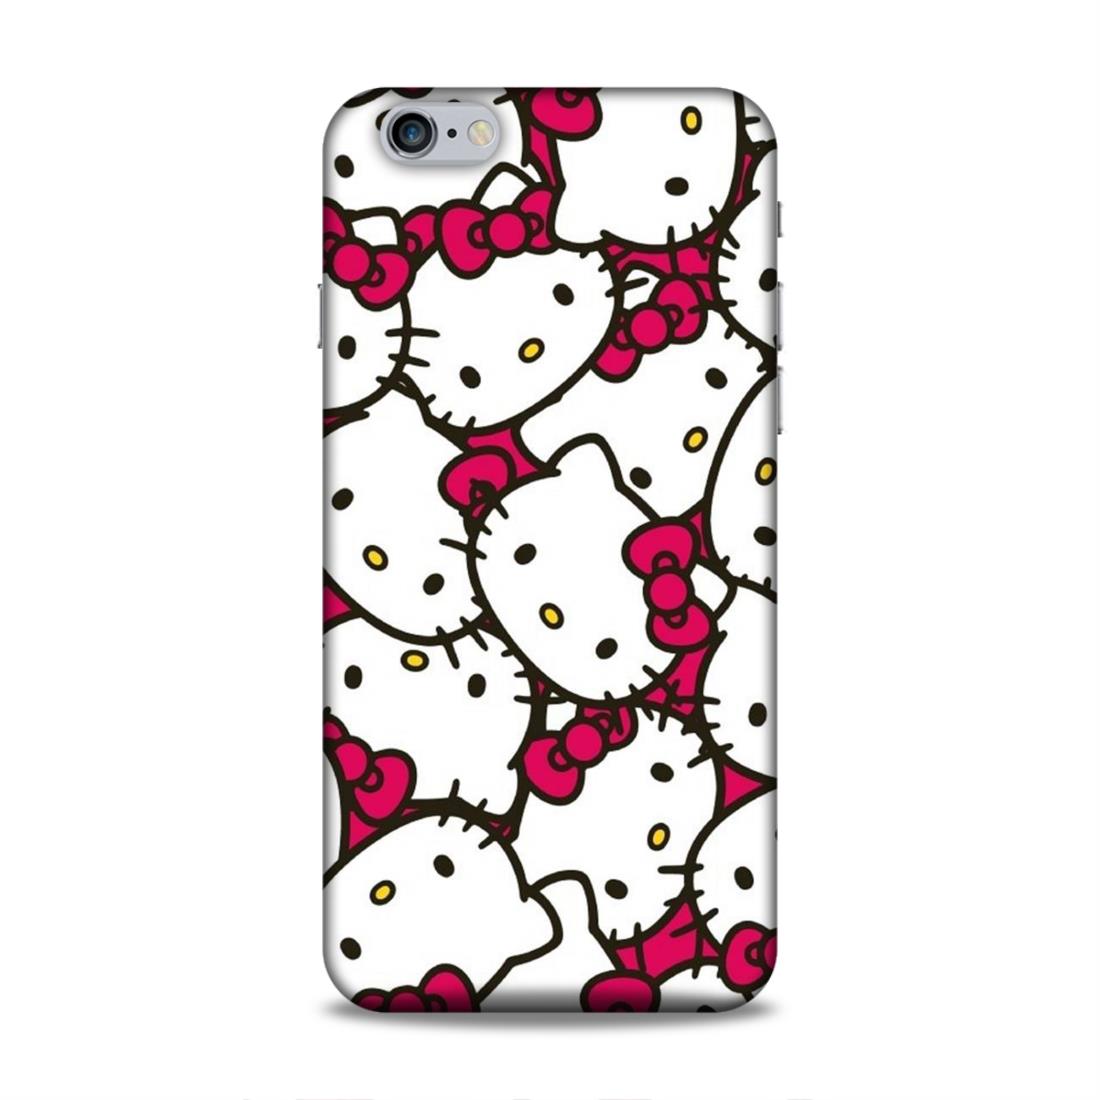 Kitty Hard Back Case For Apple iPhone 6 Plus / 6s Plus